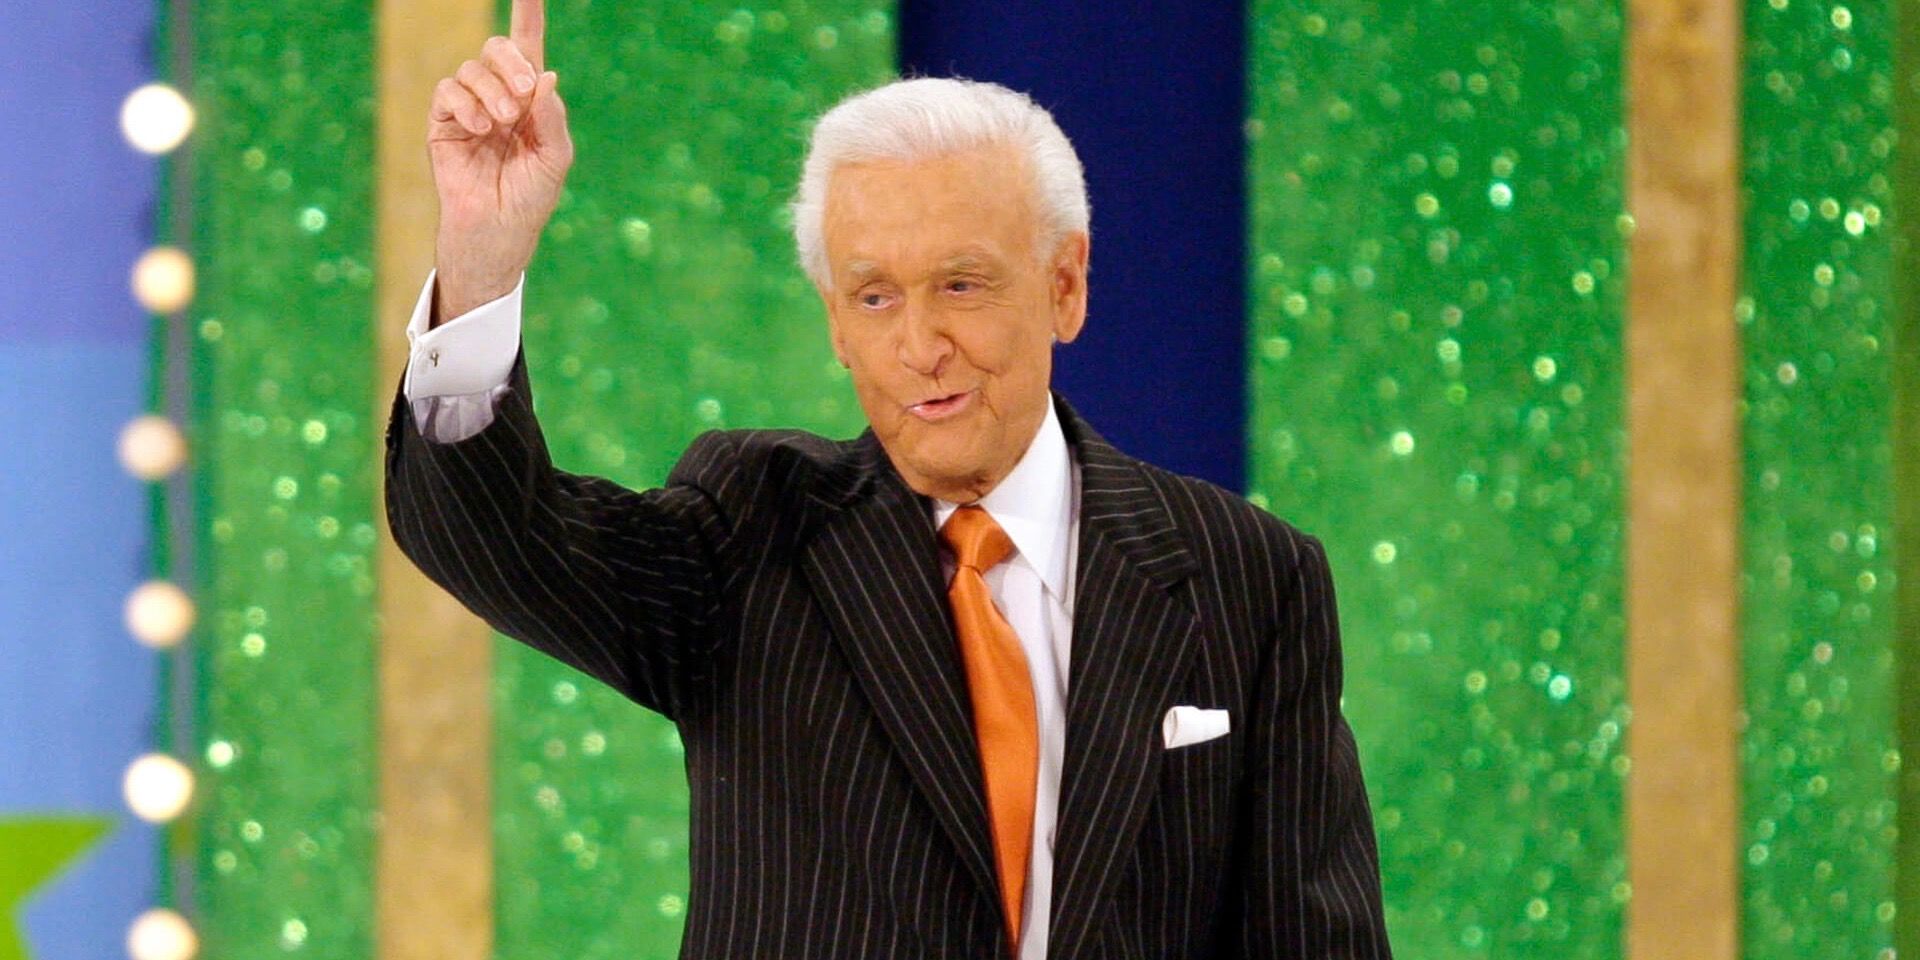 Bob Barker on The Price is Right.